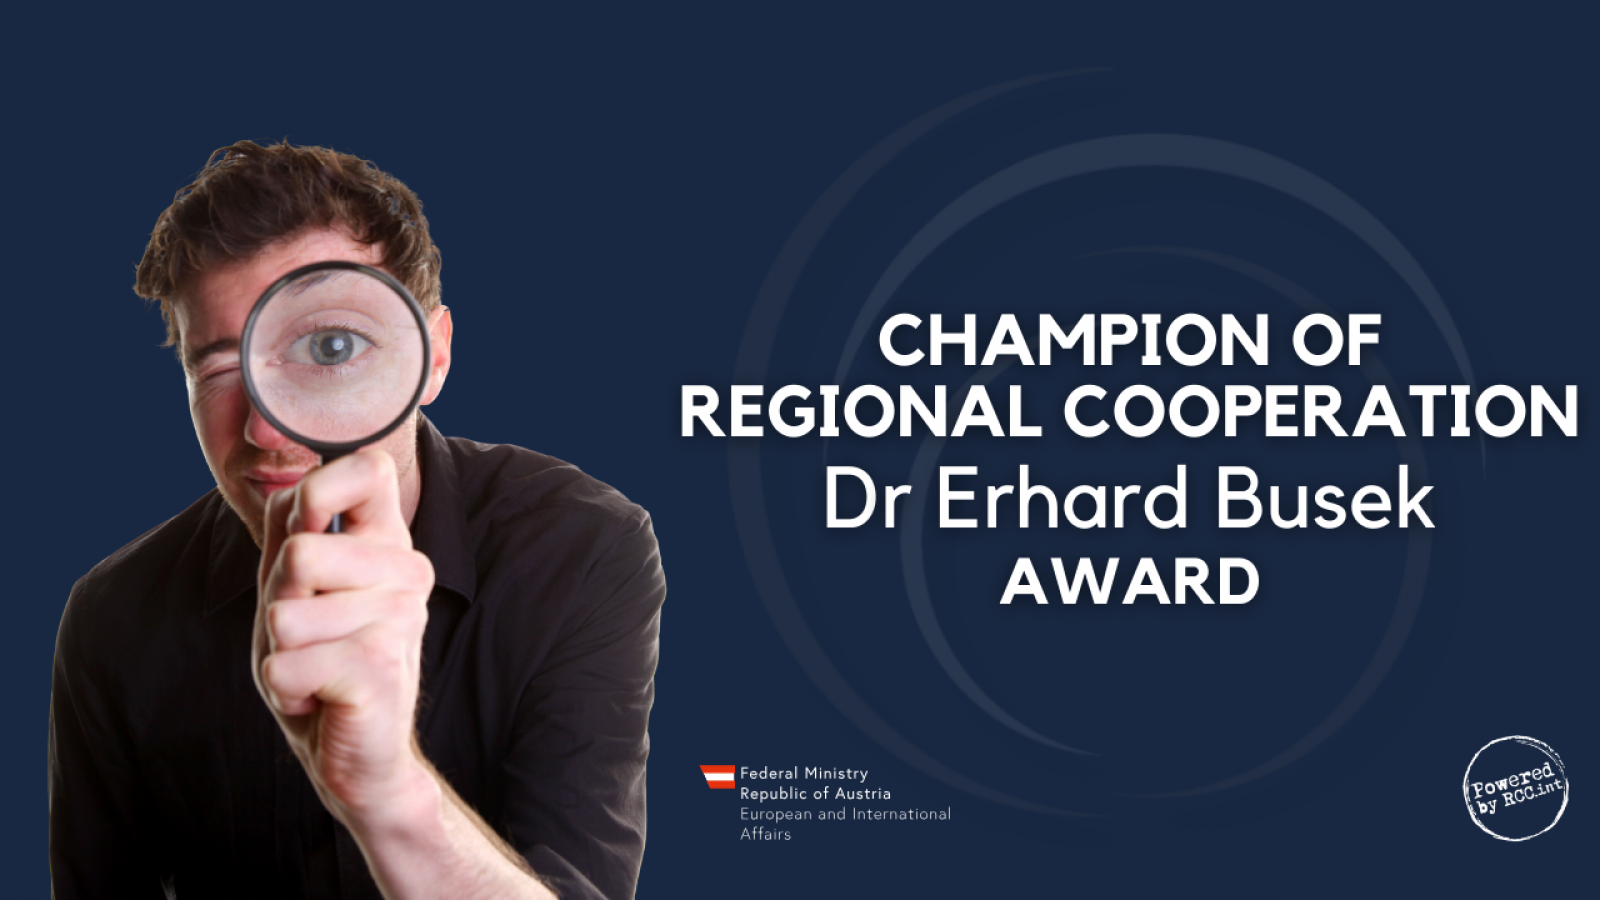 We're looking for the next Champion of Regional Cooperation